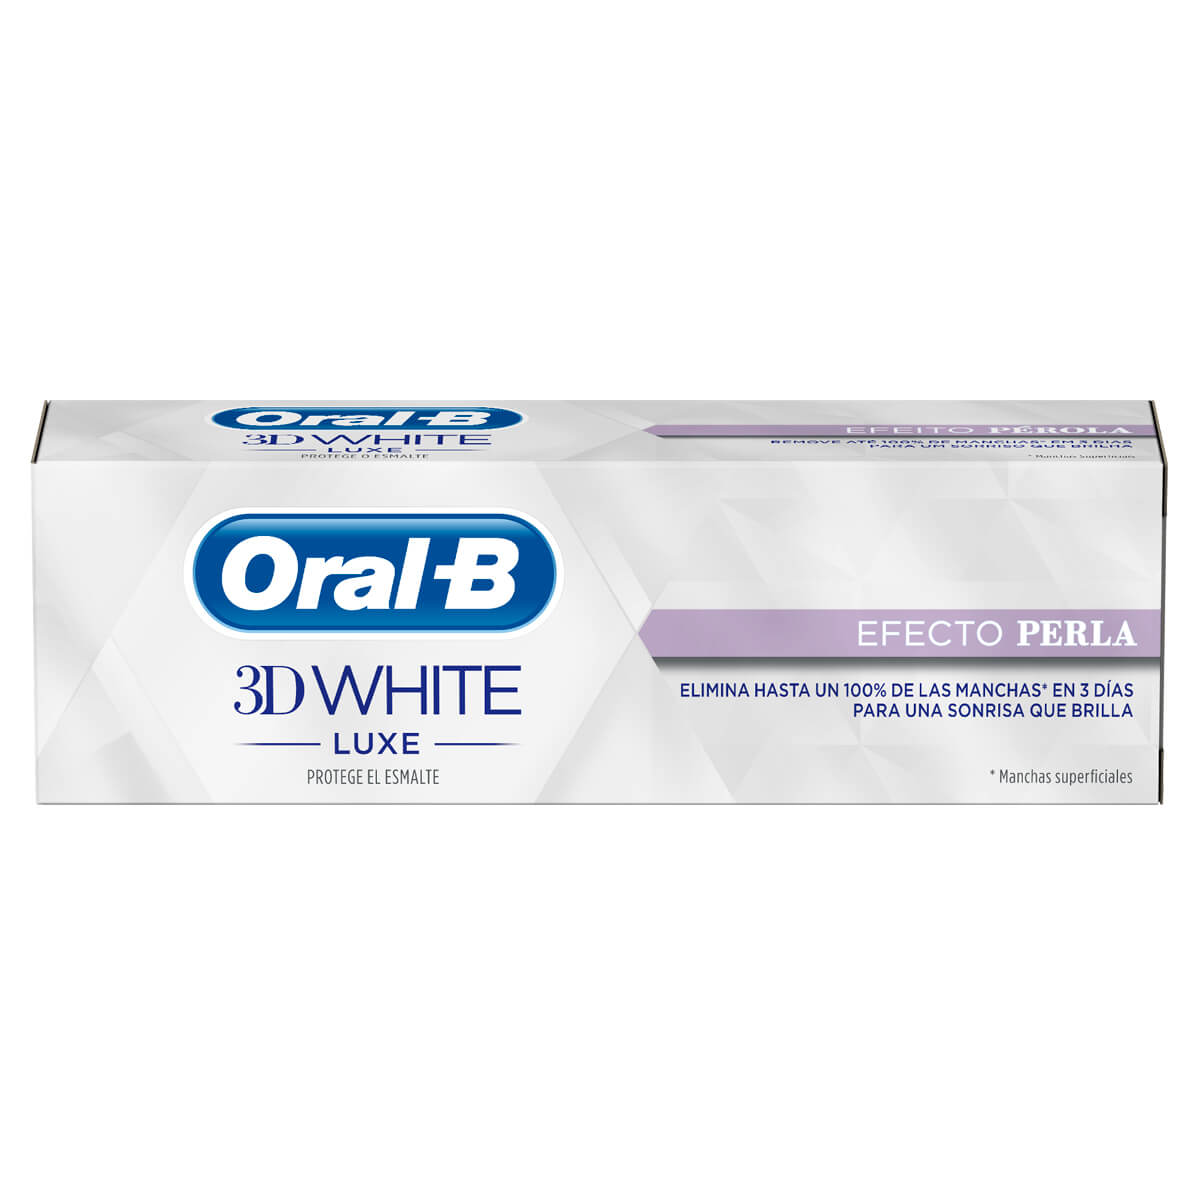 Oral-B 3D White Luxe Efecto Perla undefined